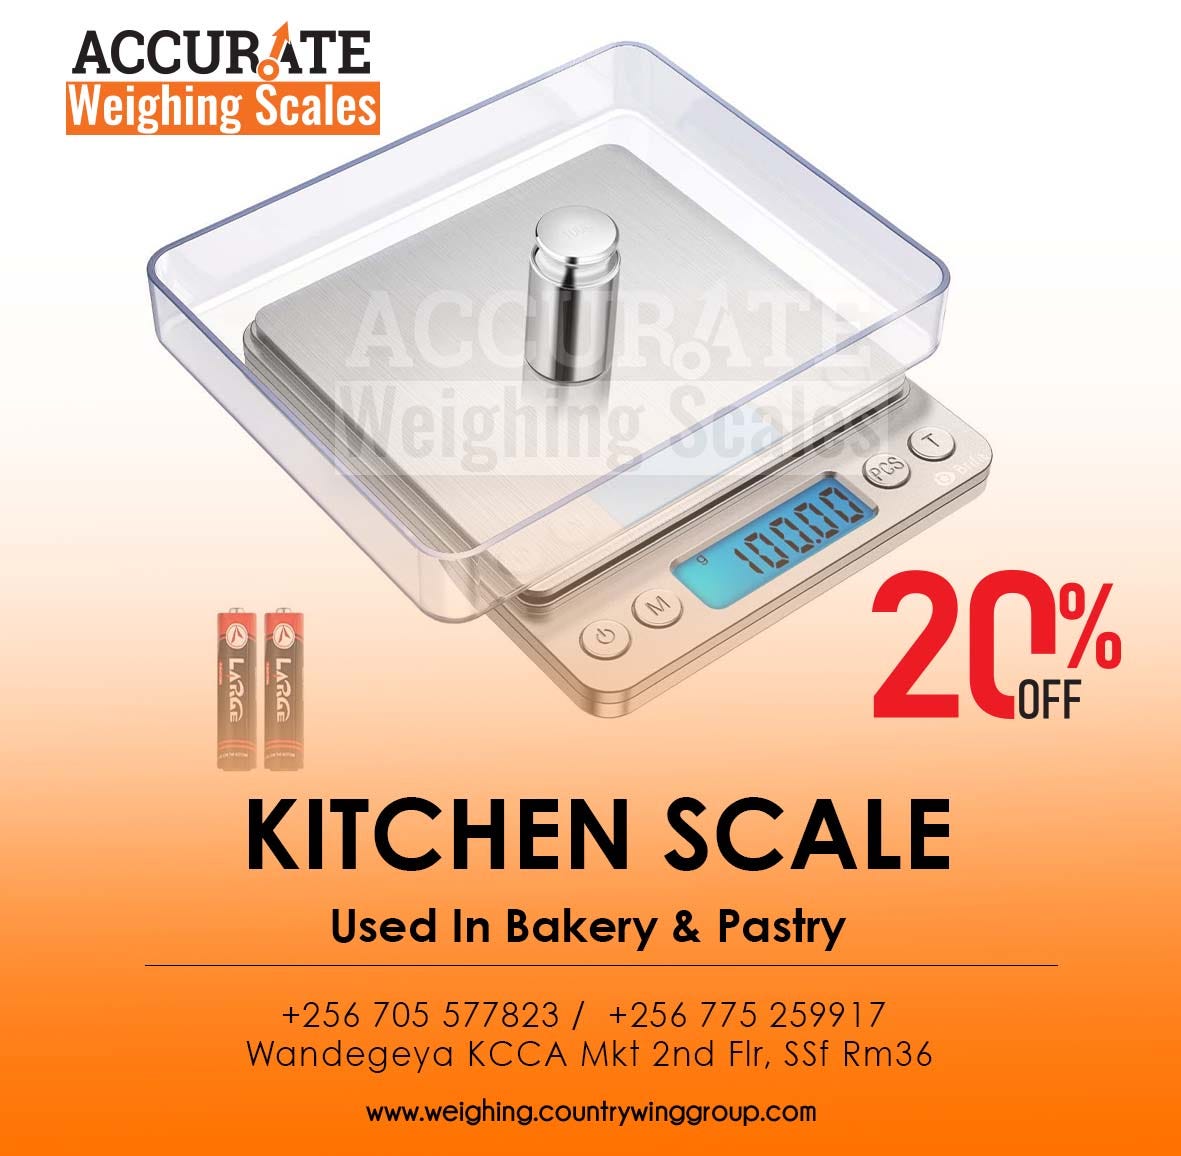 Why Do You Need an Accurate Baking Scale?